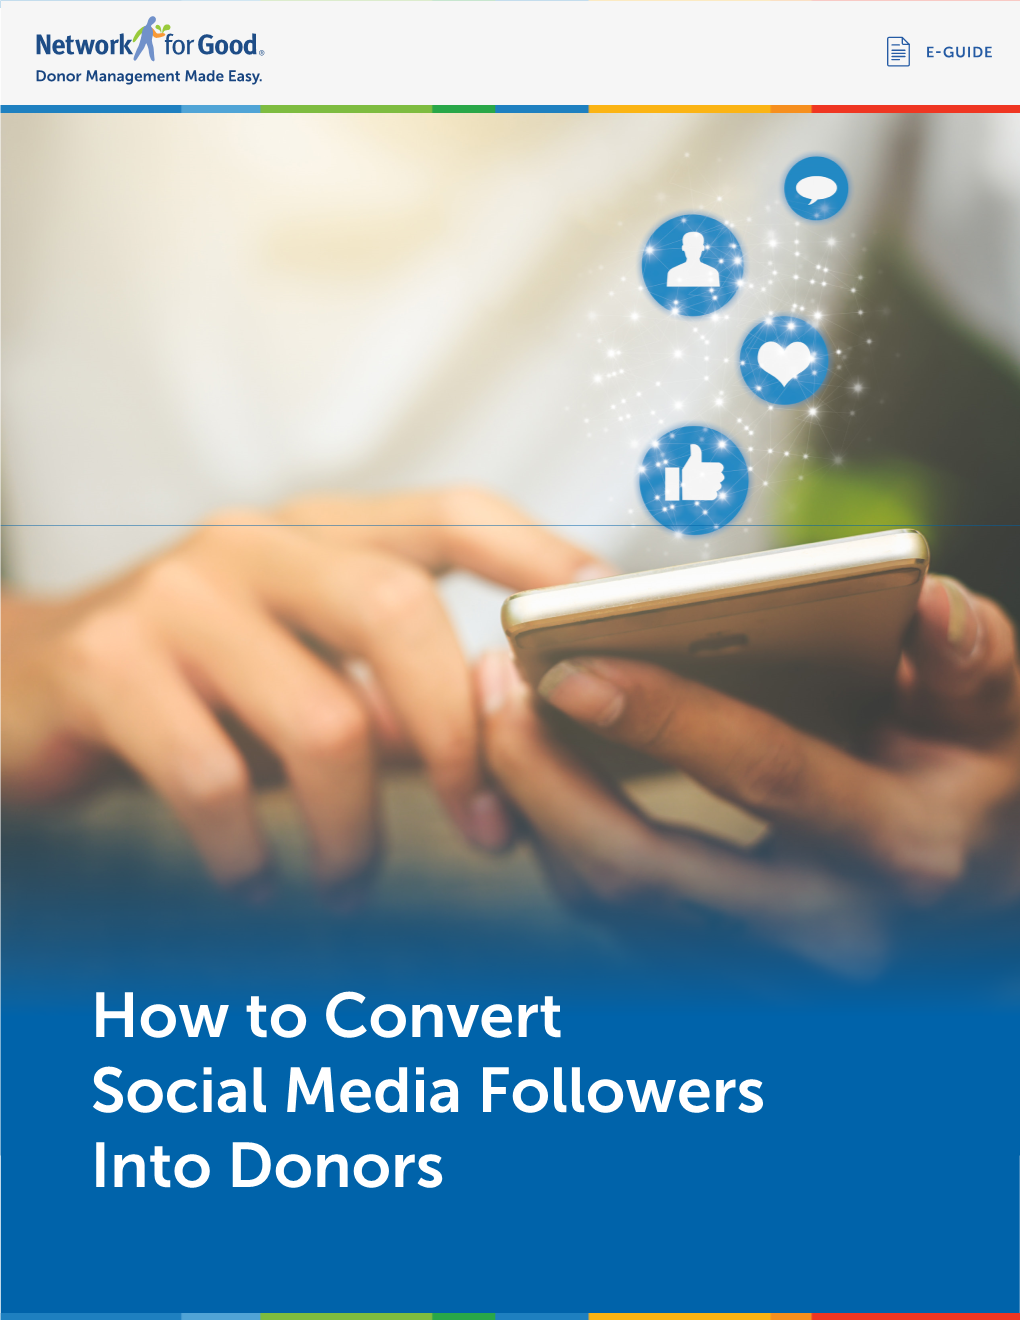 How to Convert Social Media Followers Into Donors